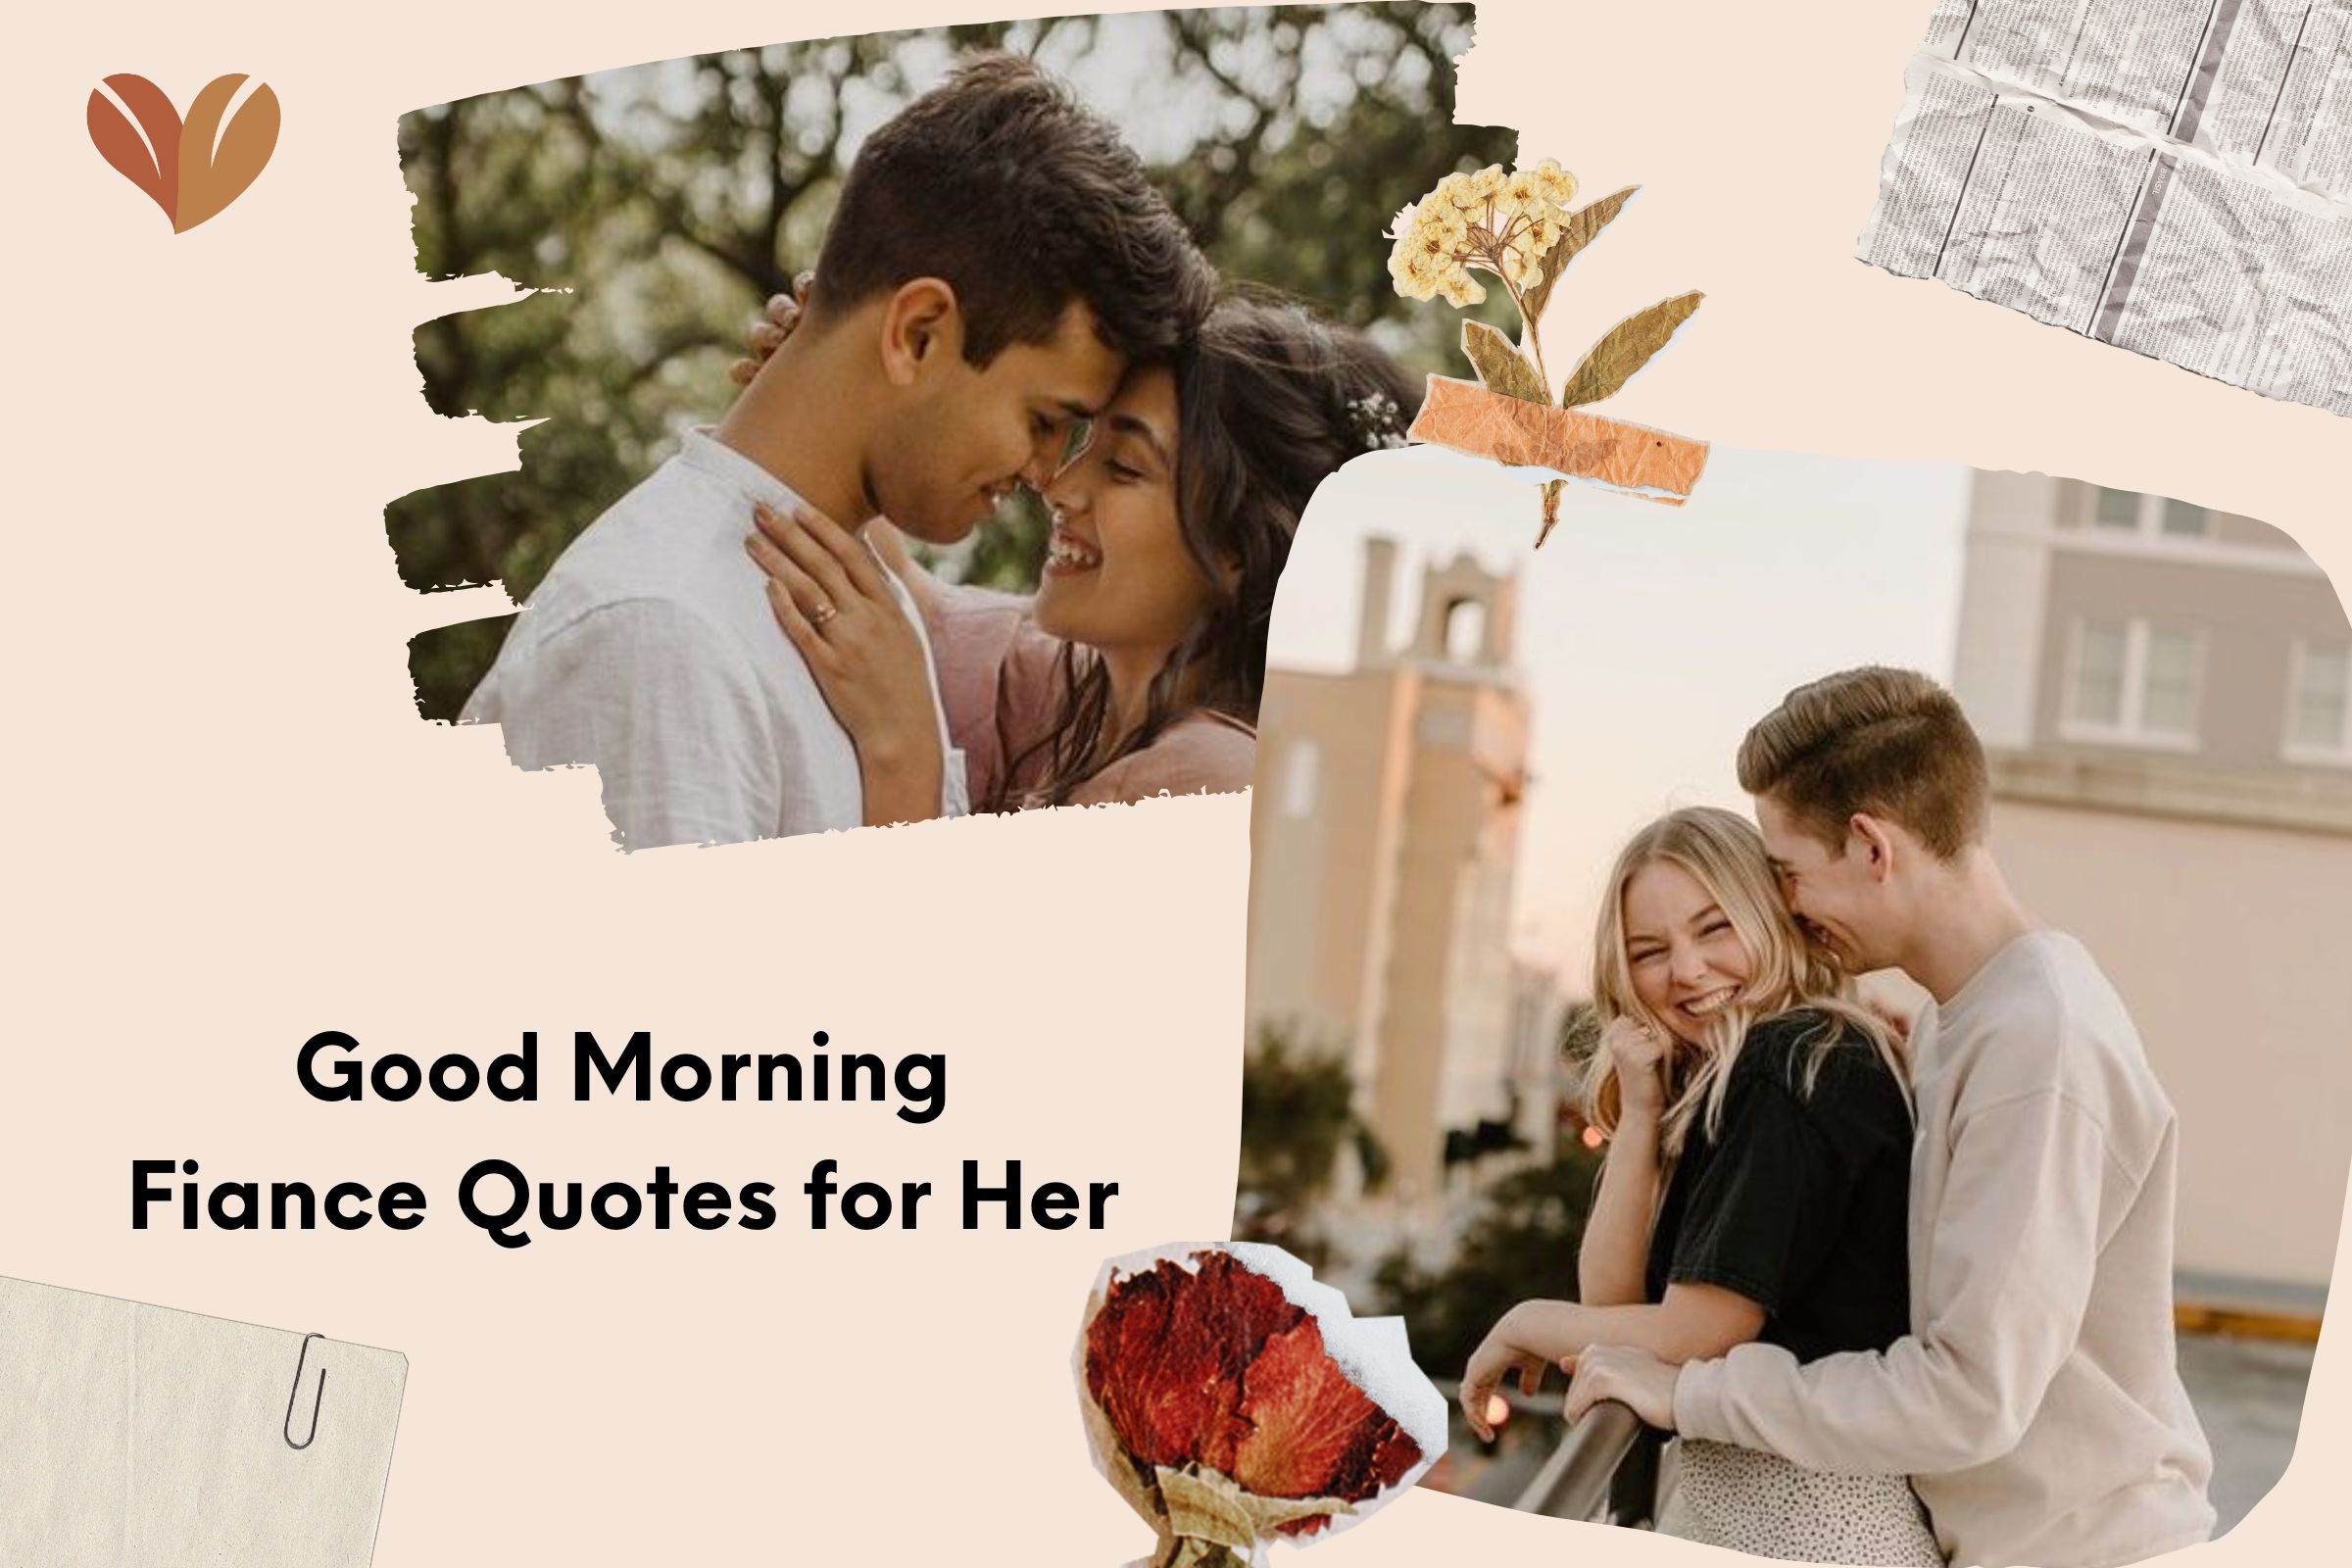 Good MorningFiance Quotes for Her